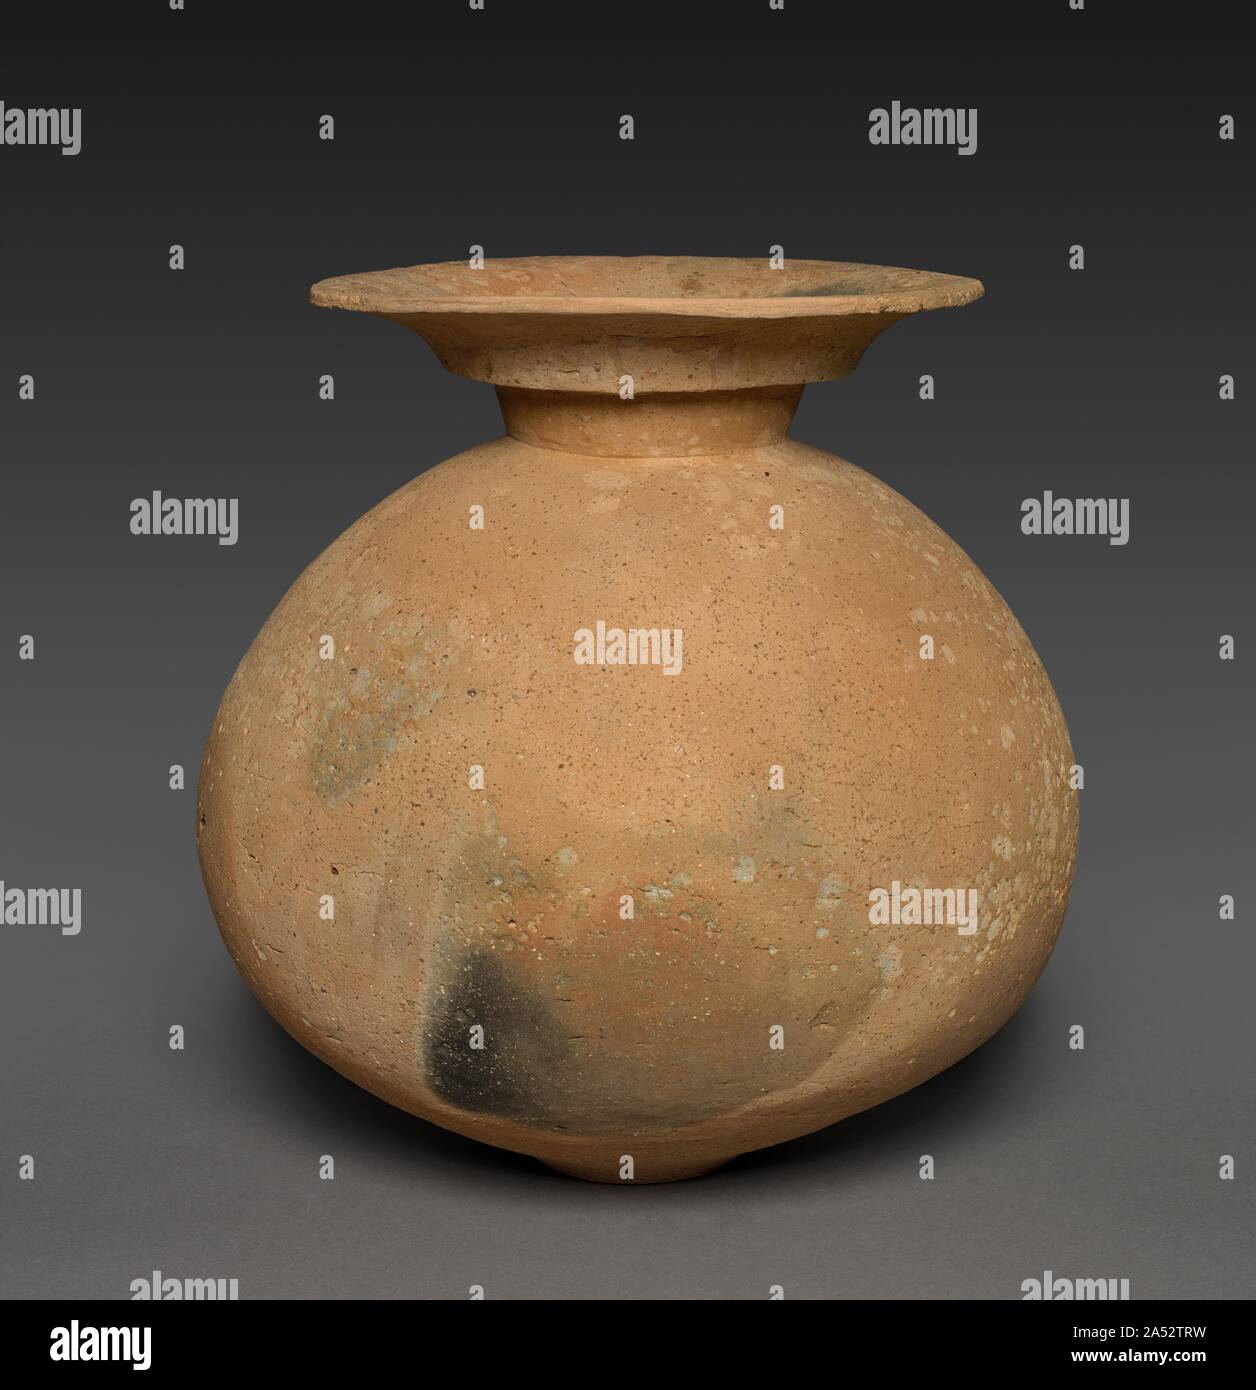 Vessel, 300s BC. Pottery existed for thousands of years in Japan before the Yayoi period, but the development of  wet rice agriculture and permanent settlements by previously nomadic communities changed its form significantly. Yayoi period pots were aimed more at long-term storage than those from prior millennia. Their smooth, unadorned surfaces and round shapes also reflect the style of contemporaneous works from the Korean peninsula, indicating the strong ties between Japanese communities and Korean kingdoms at the time. Stock Photo